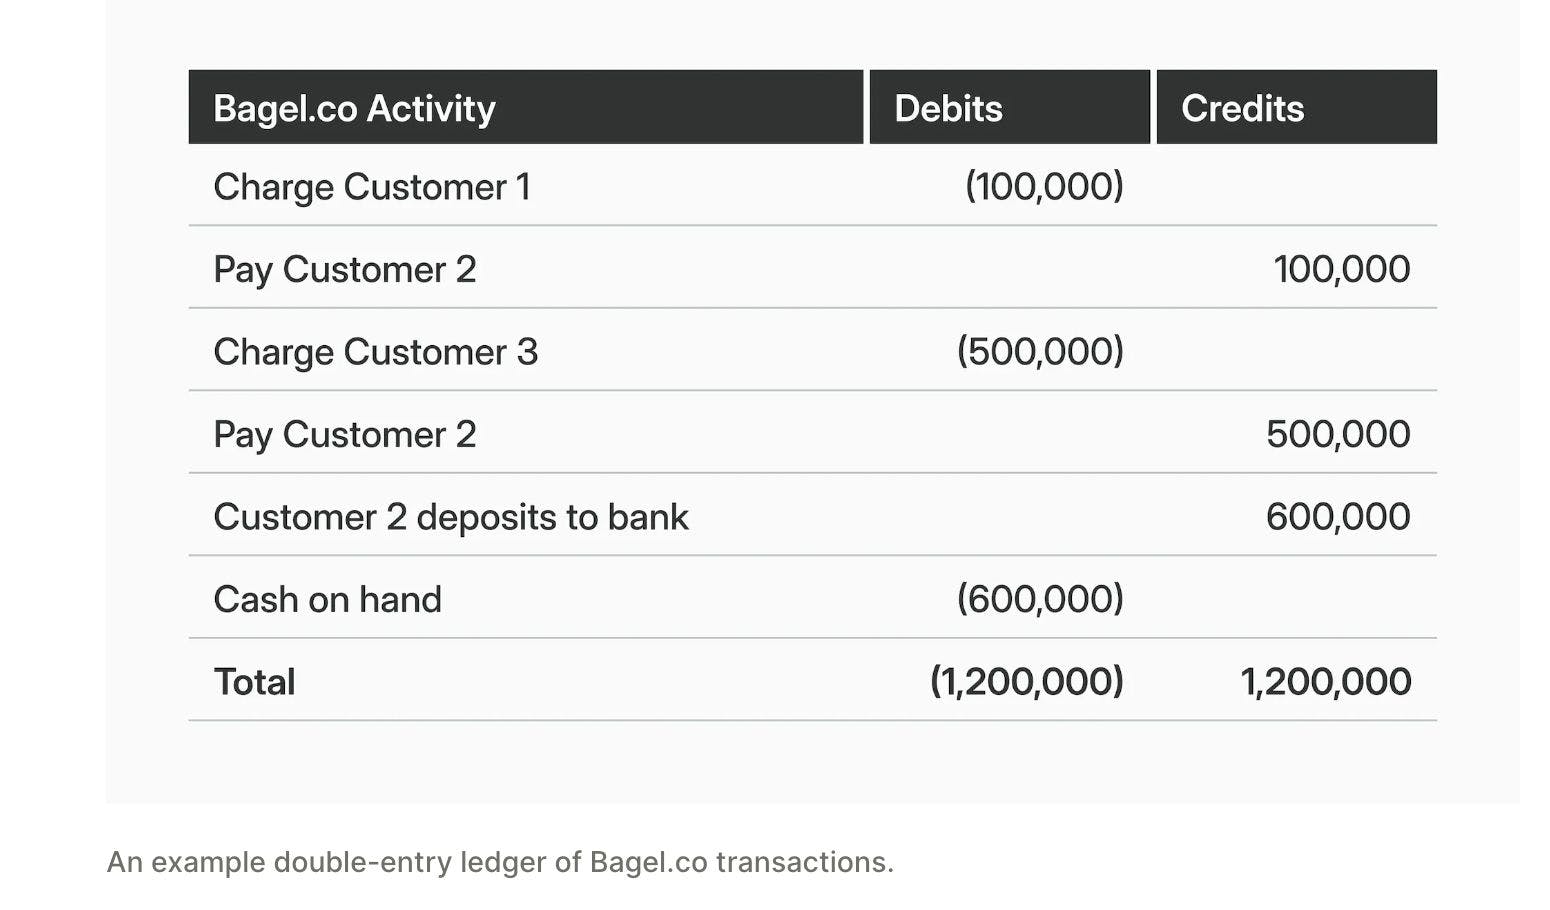 An example double-entry ledger of Bagel.co transactions